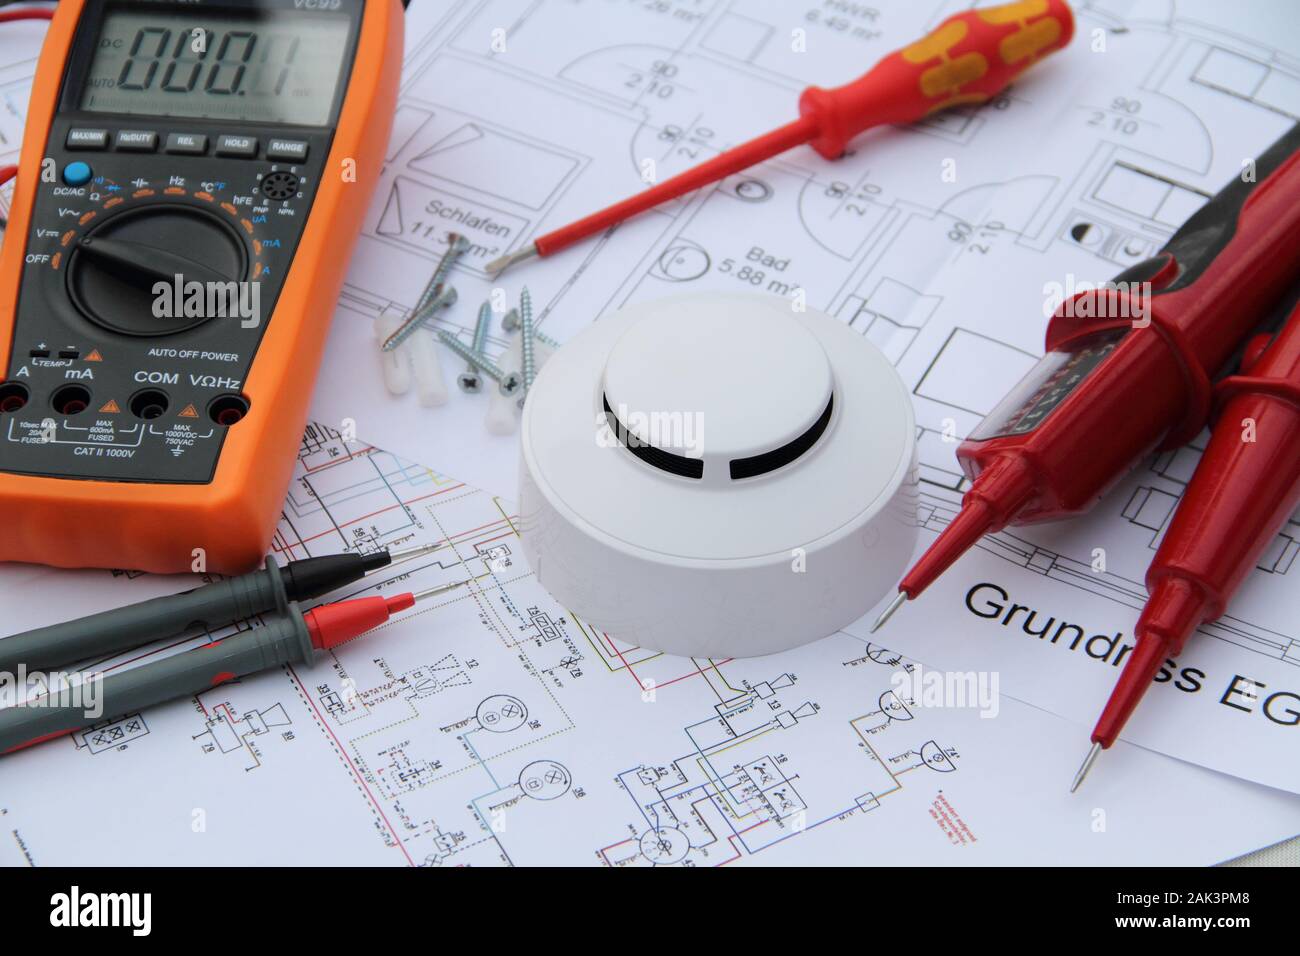 smoke detector with a screwdriver and a measuring device on a circuit diagram Stock Photo